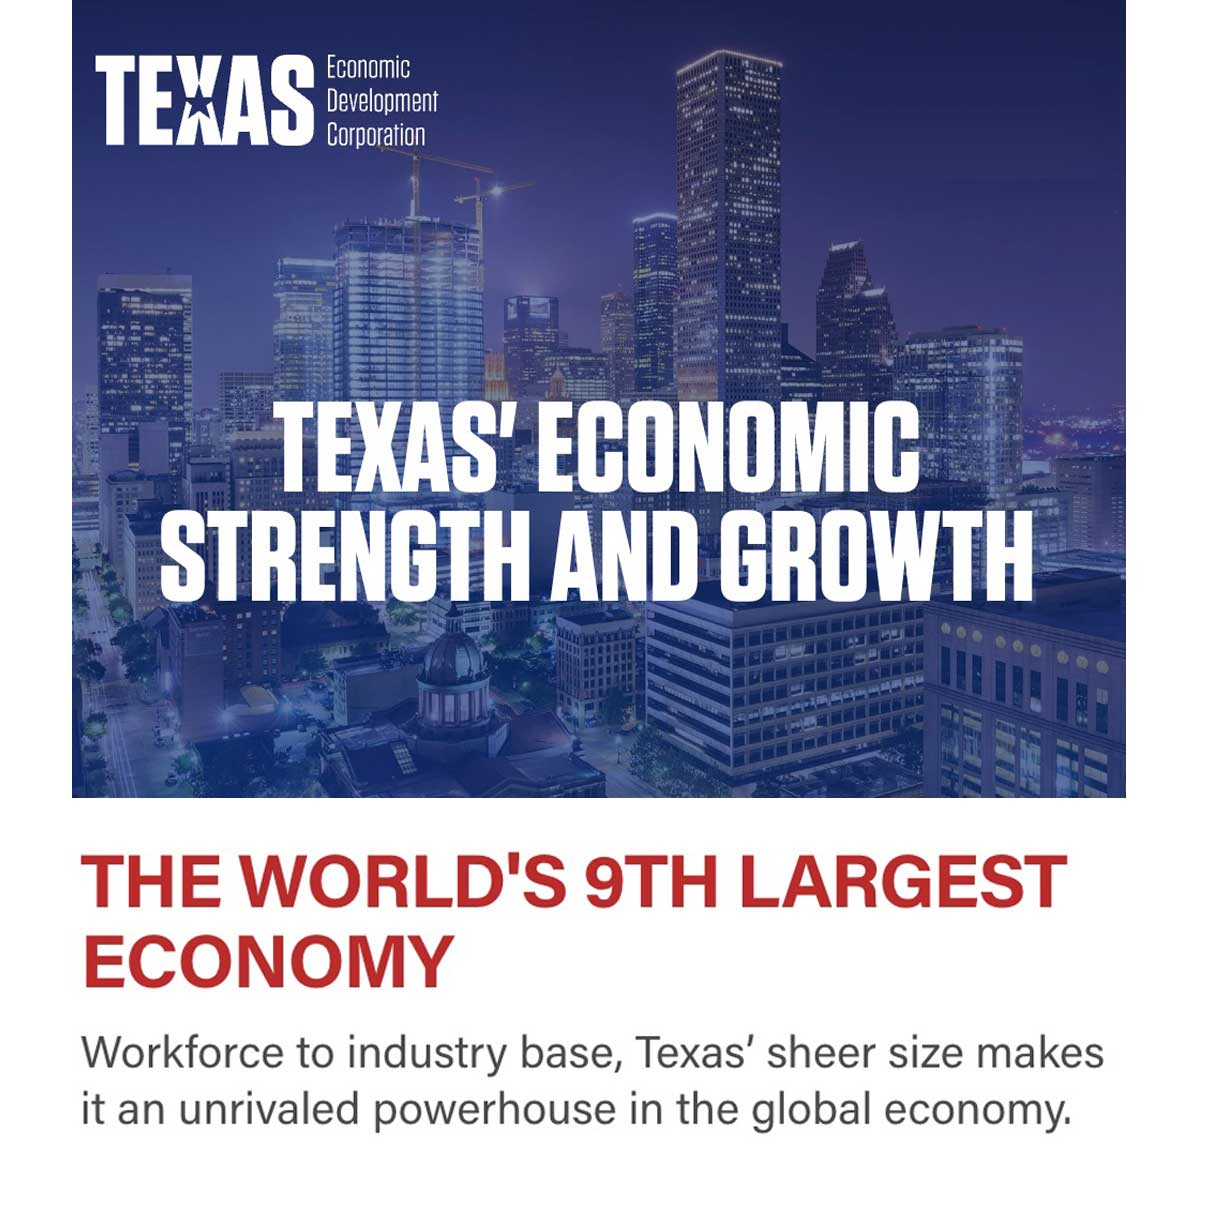 Texas' Economic Strength and Grow. The World's 9th Largest Economy